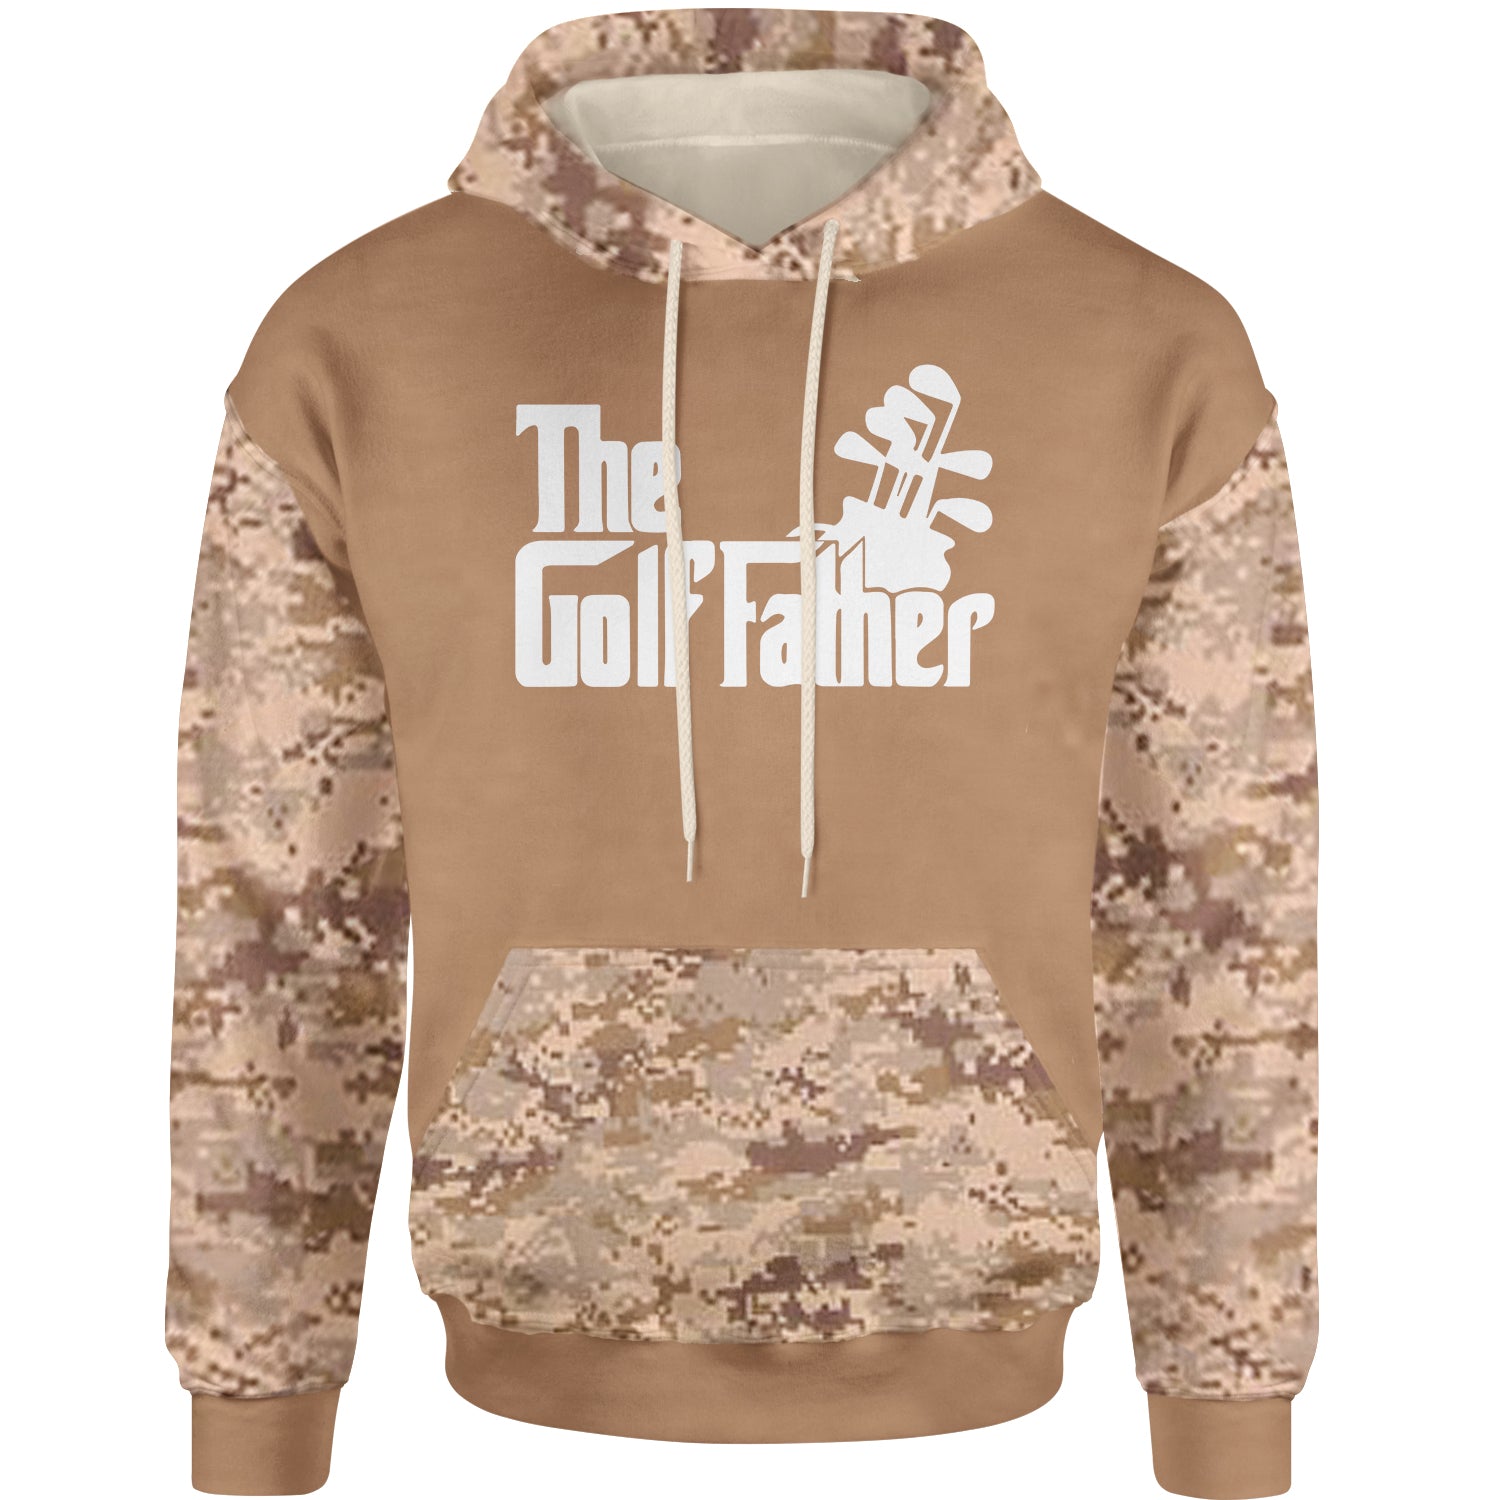 The Golf Father Golfing Dad Adult Hoodie Sweatshirt #expressiontees by Expression Tees